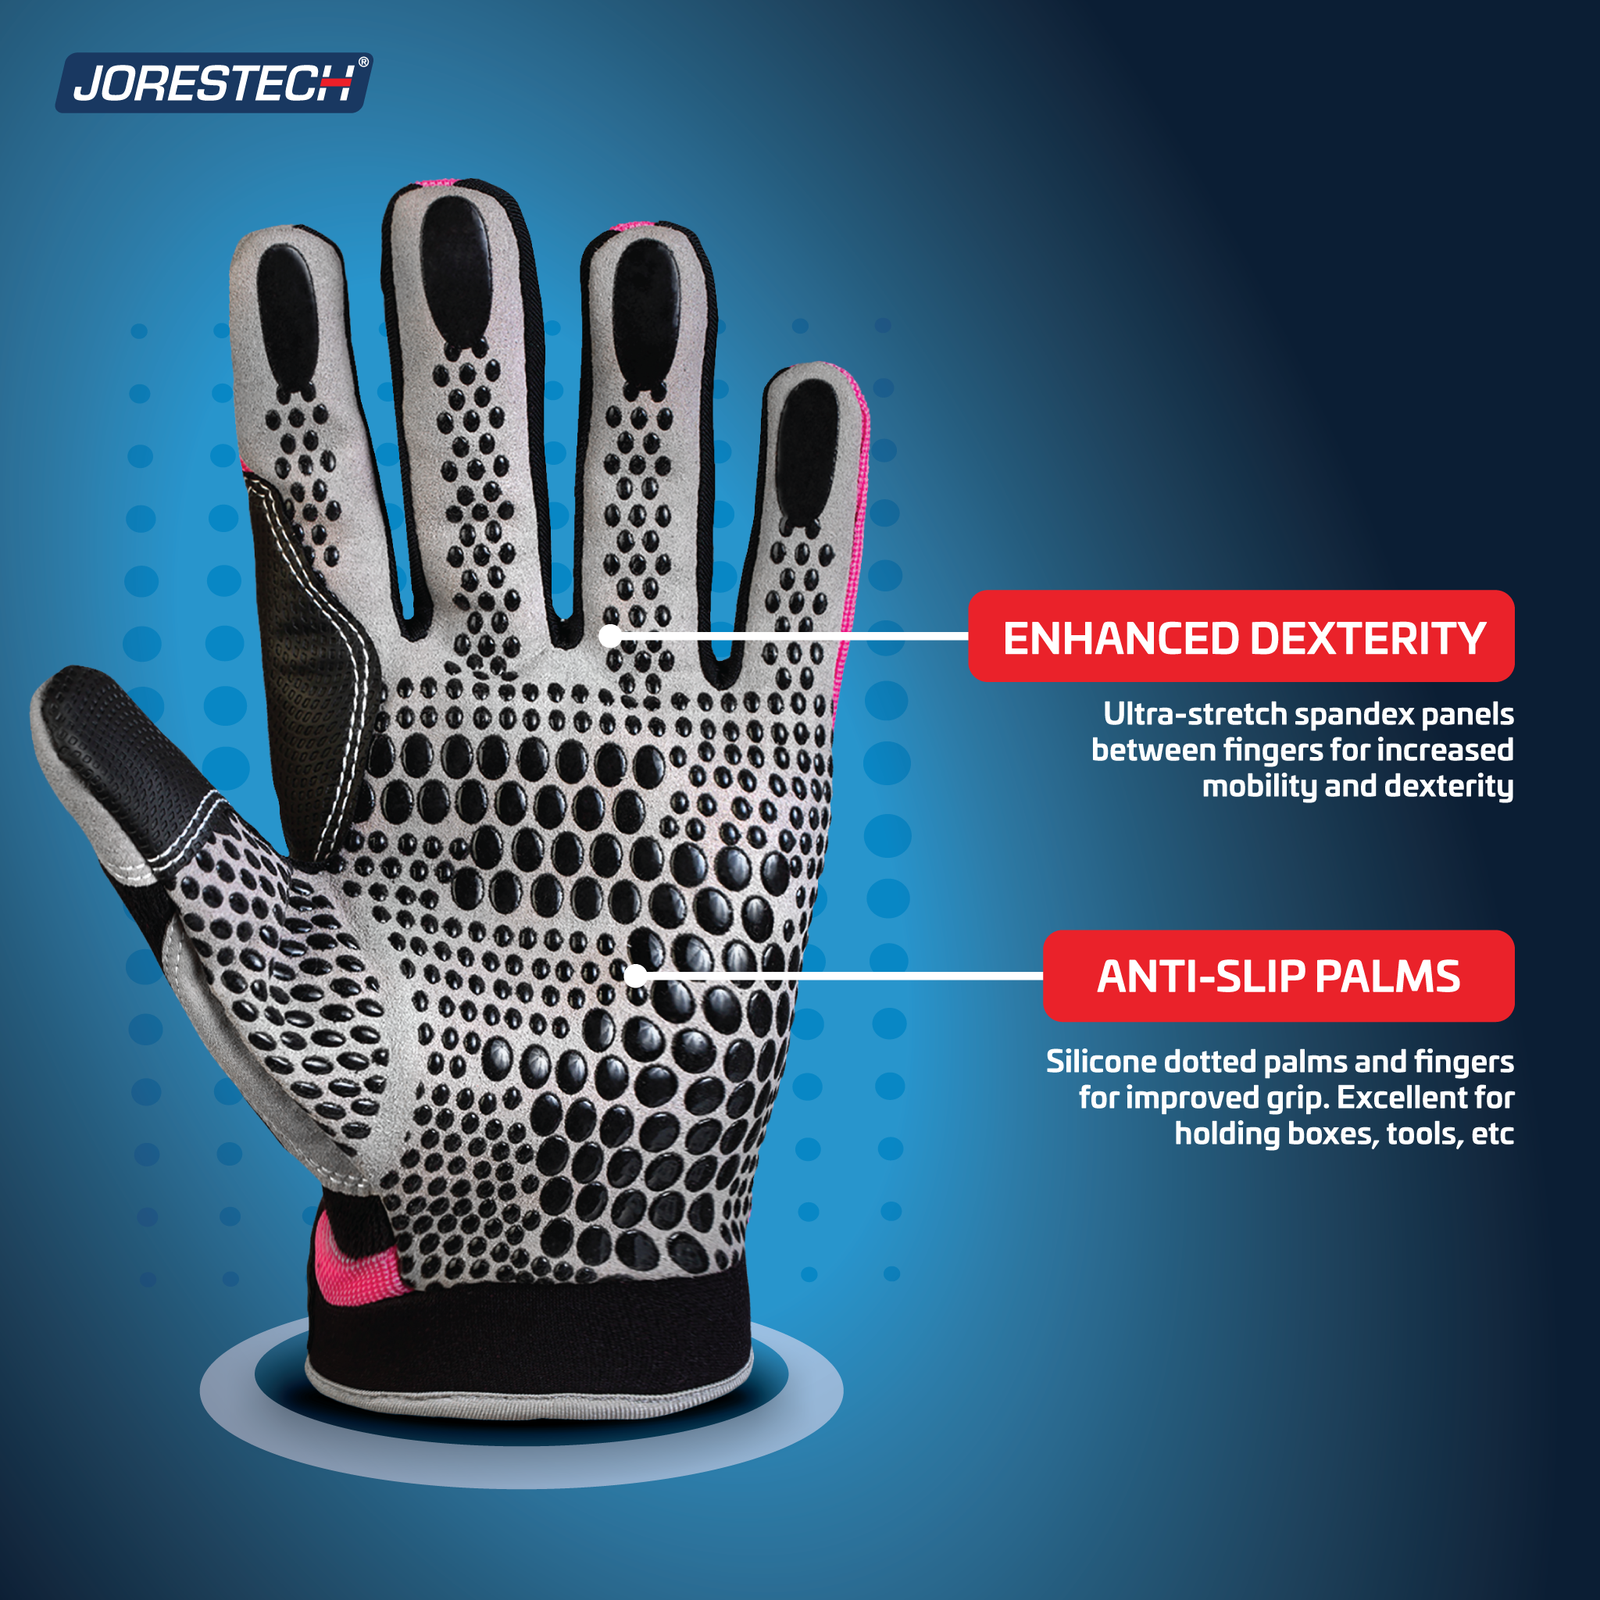 Text reads: Safety work glove spandex panels between fingers for increased mobility and dexterity. Silicone dotted palms and fingers for improved firm grip.